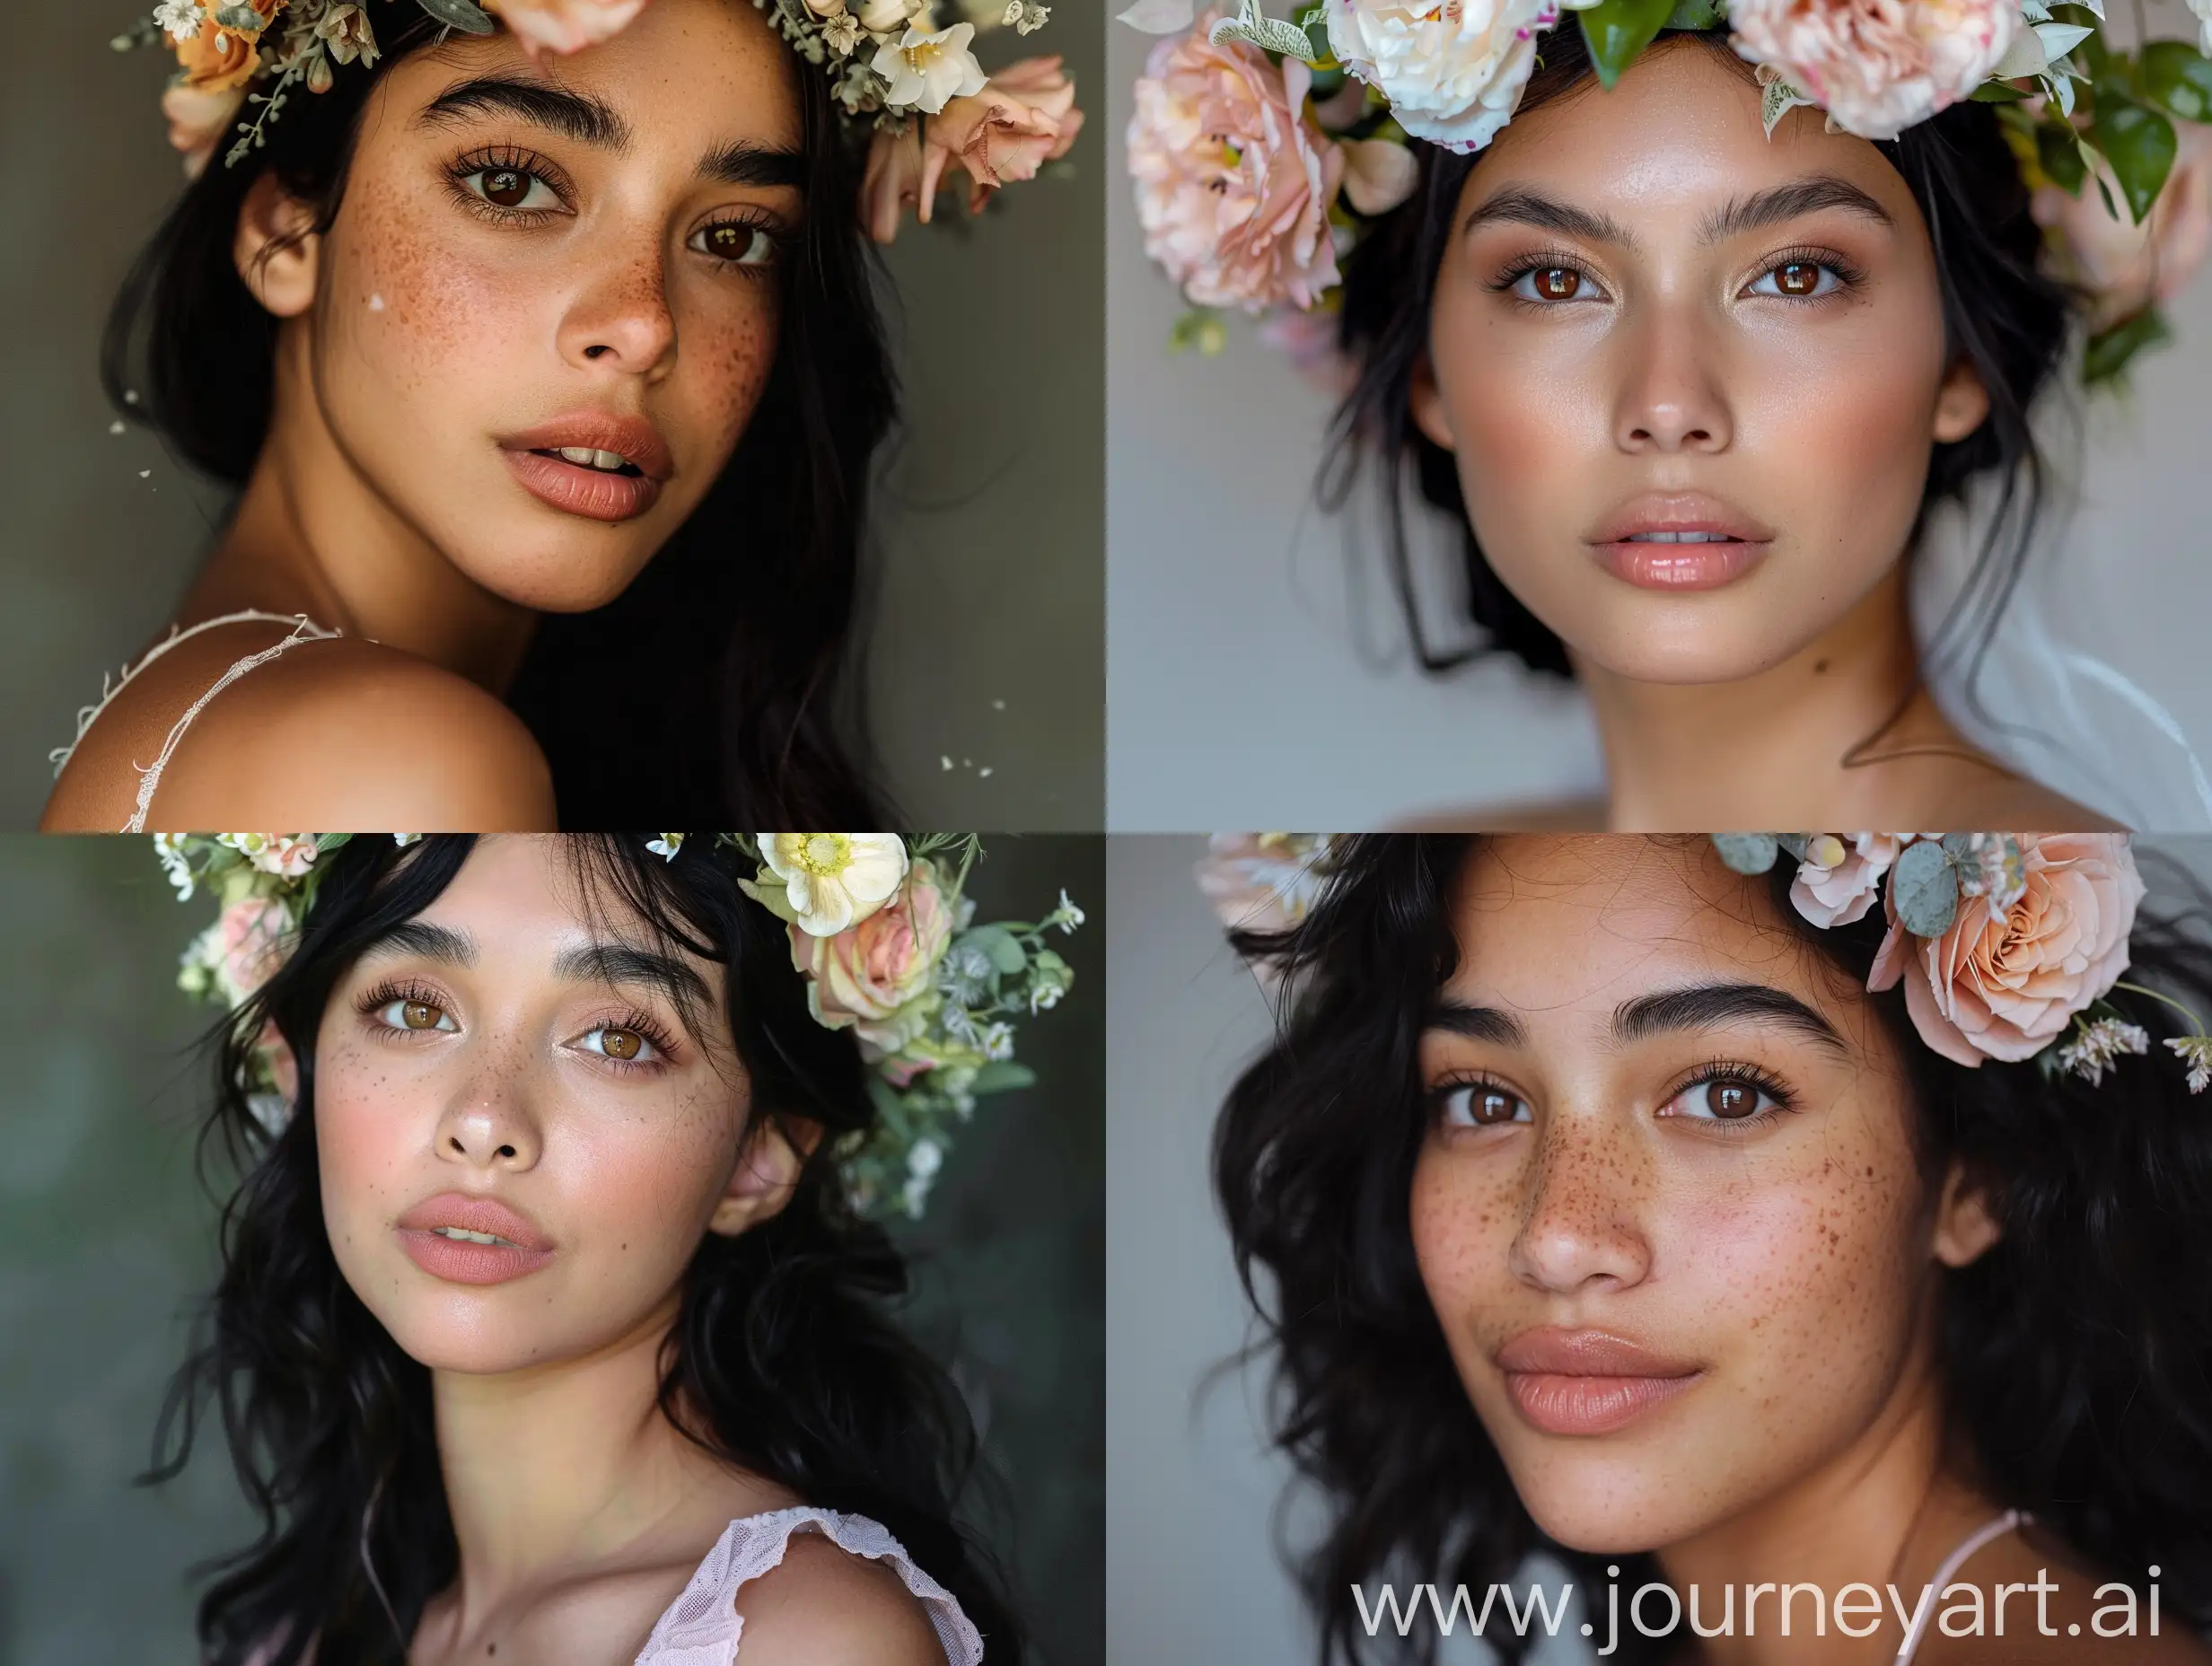 coraima torres actress with  fair brown eyes and dark black hair and  wears flower crown